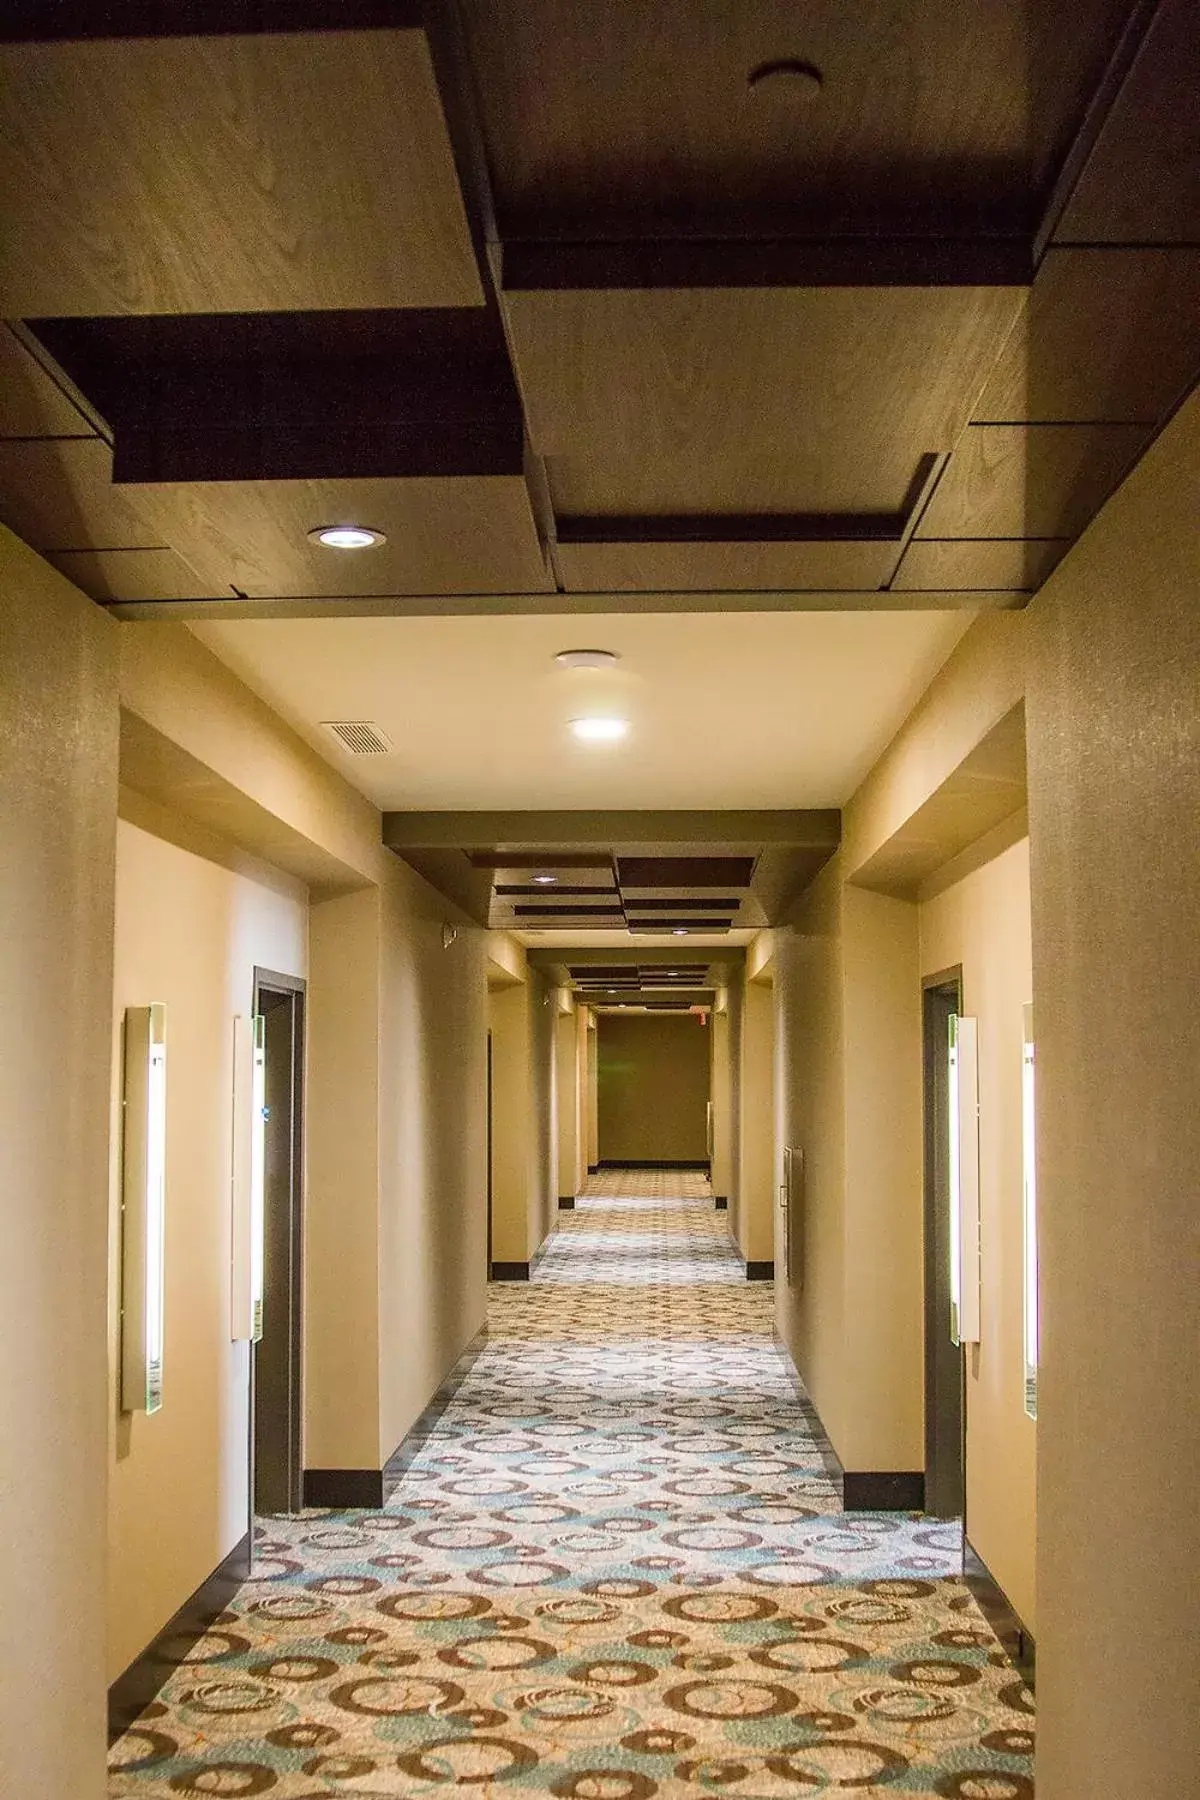 Area and facilities in River Bend Casino & Hotel